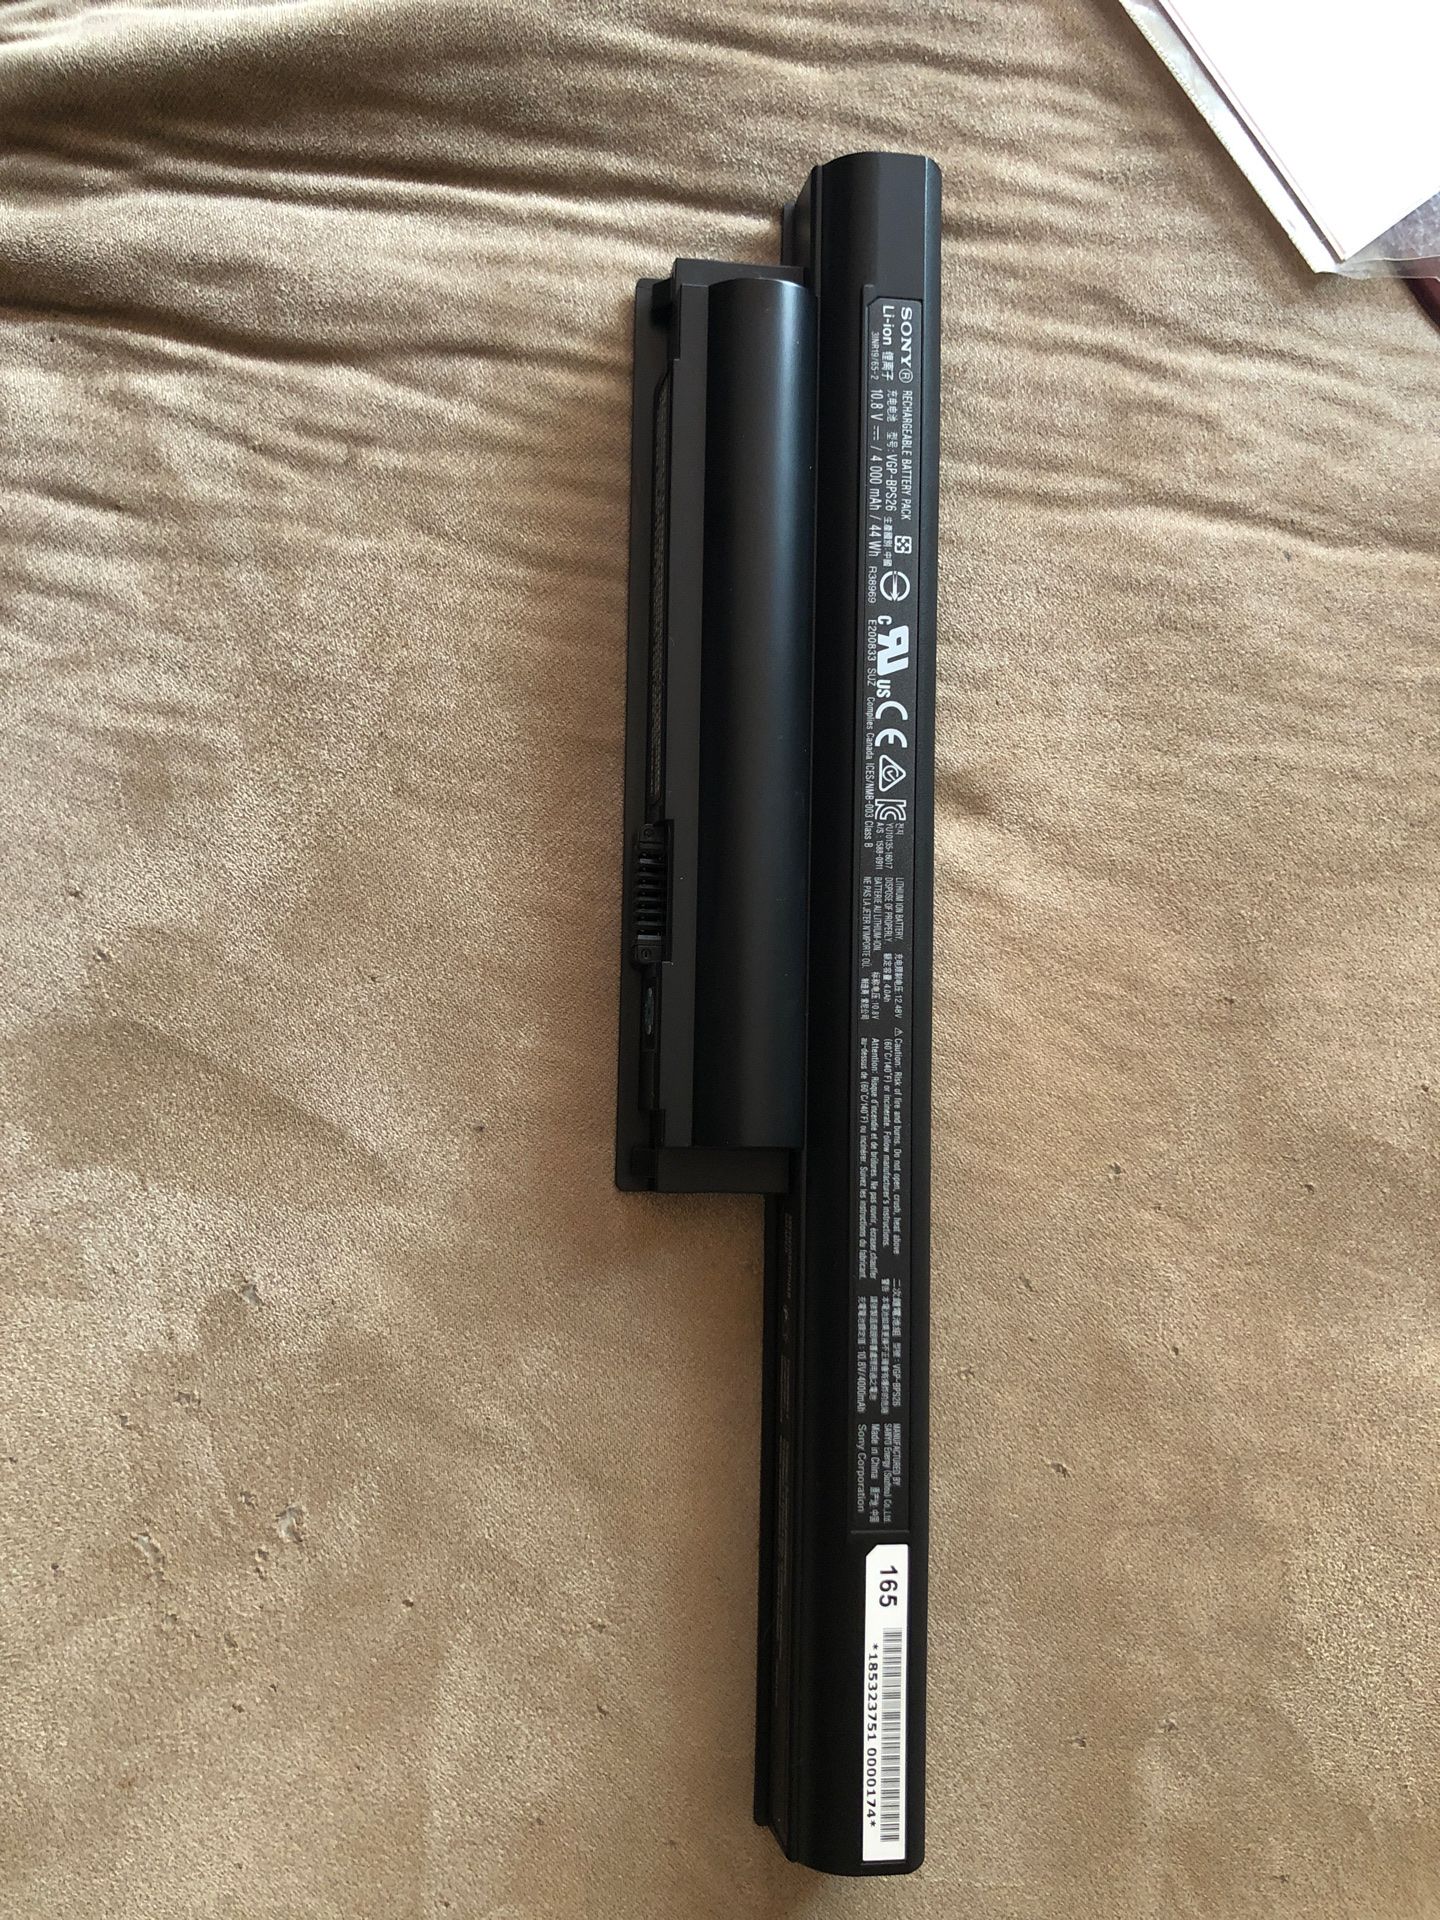 SONY Vaio Laptop Replacement Battery